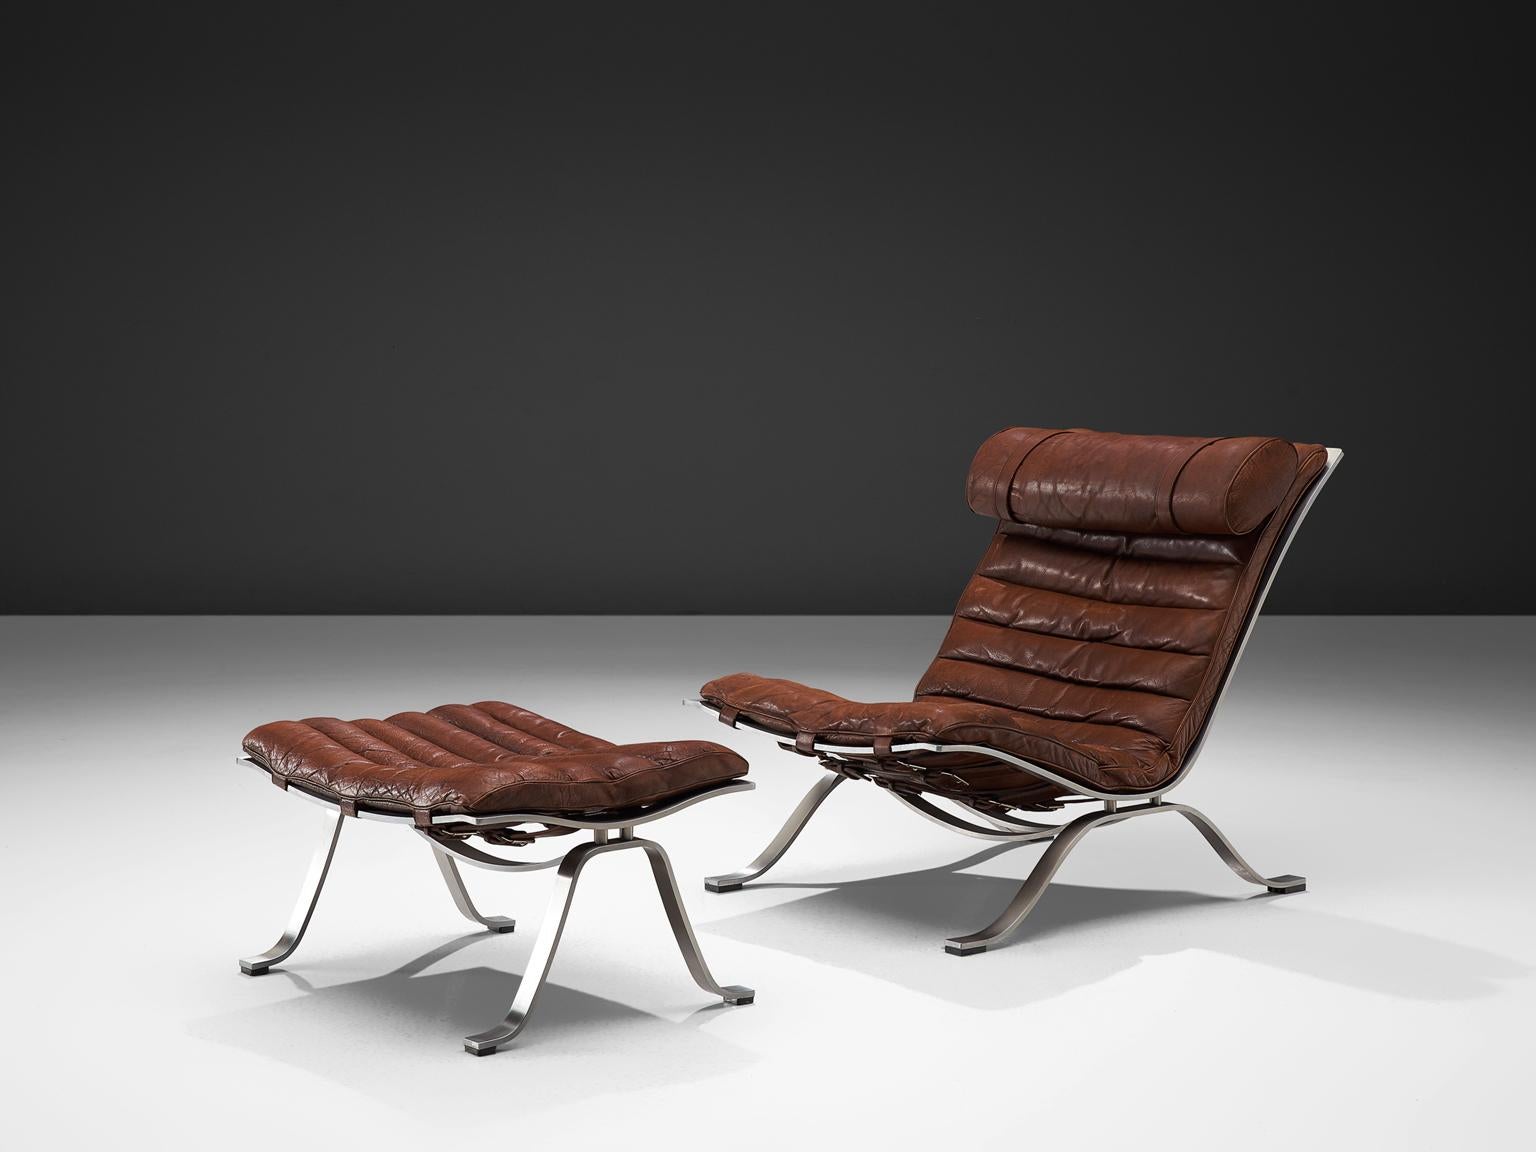 Arne Norell for Norell Møbel AB, 'Ari' lounge chair and ottoman, brown leather, chrome-plated steel, Denmark, 1966

This lounge chair is designed by Arne Norell. This chair, model Ari, comes with a footstool. The whole frame is executed in